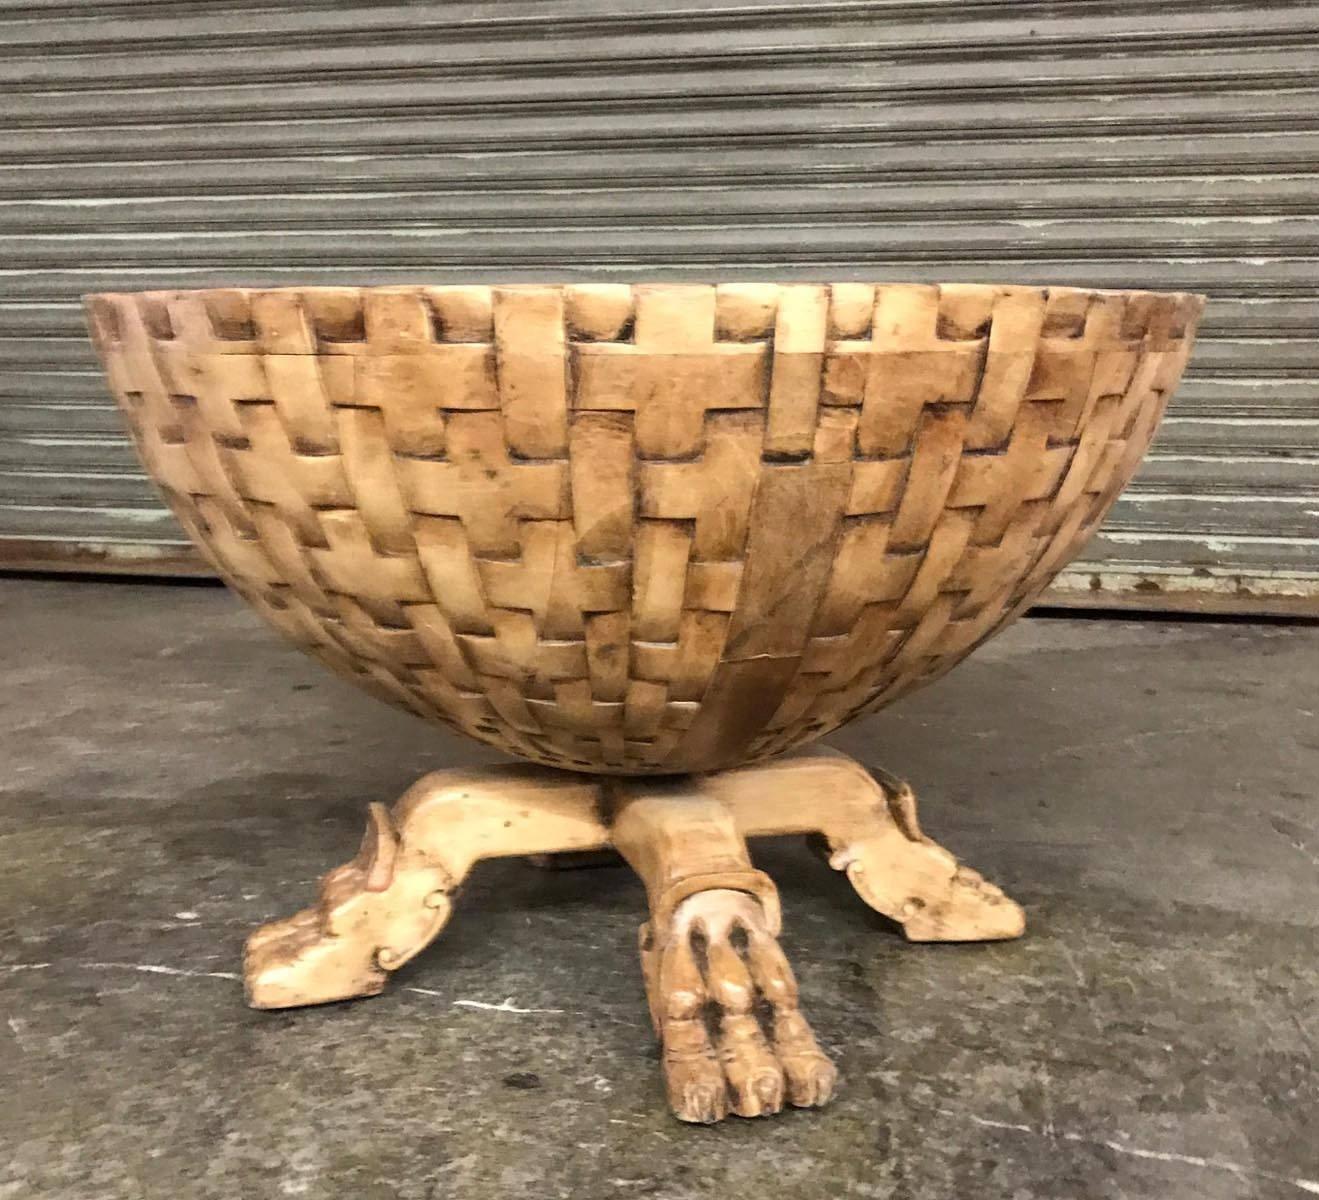 Custom side table or small coffee table with basketweave design and great little animal feet. In alder. This particular one is available off the floor.
Can be custom-made in any size and in a variety of finishes. Handmade and finished in Los